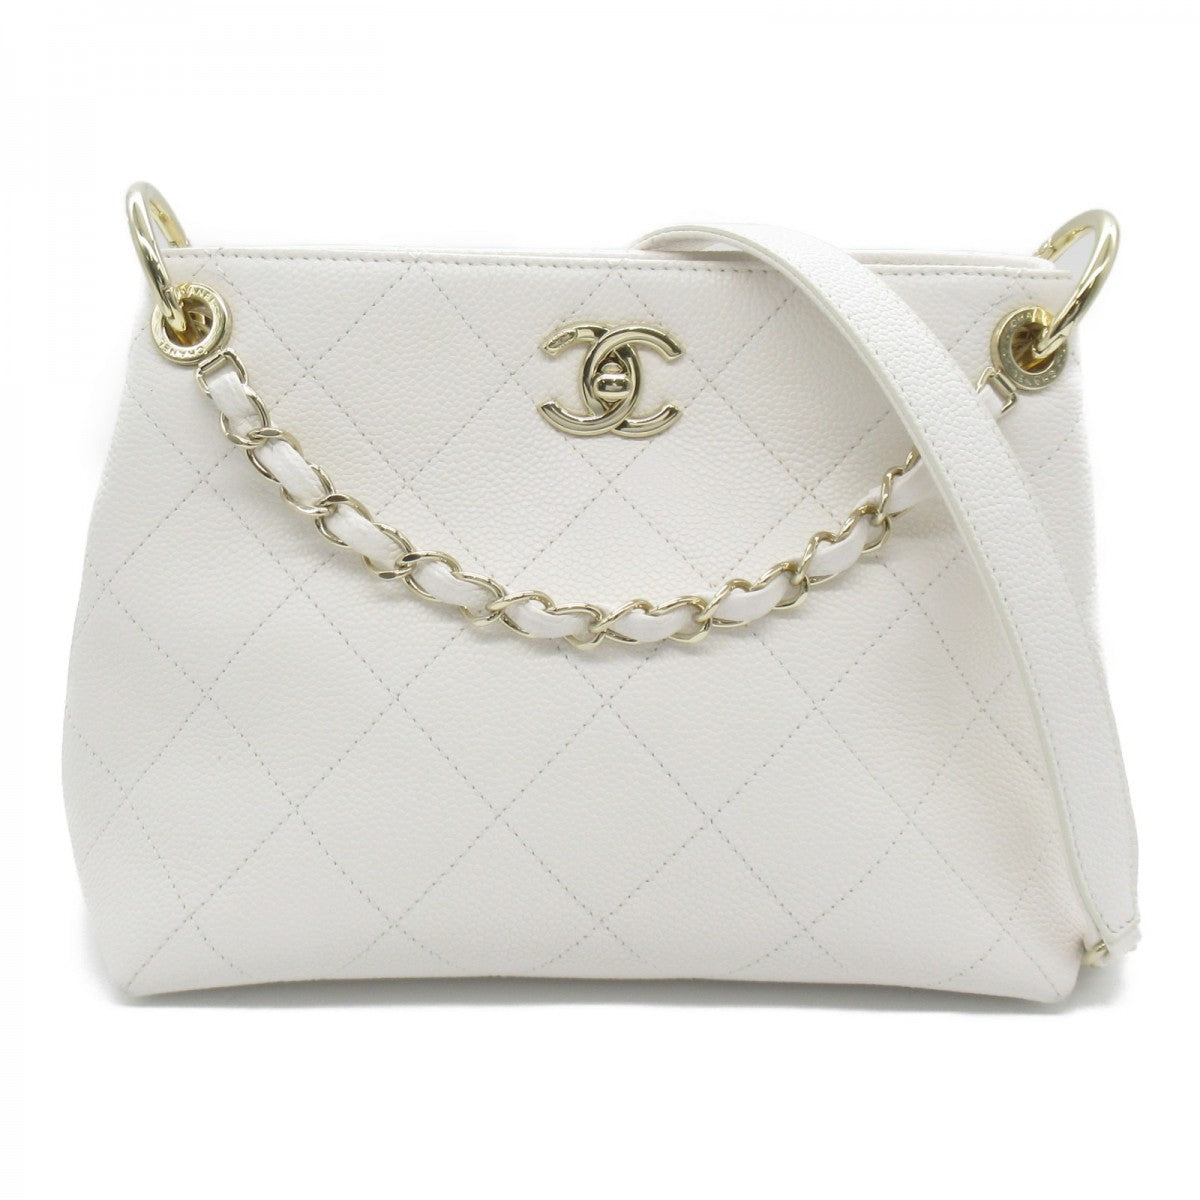 CC Quilted Caviar Chain Shoulder Bag